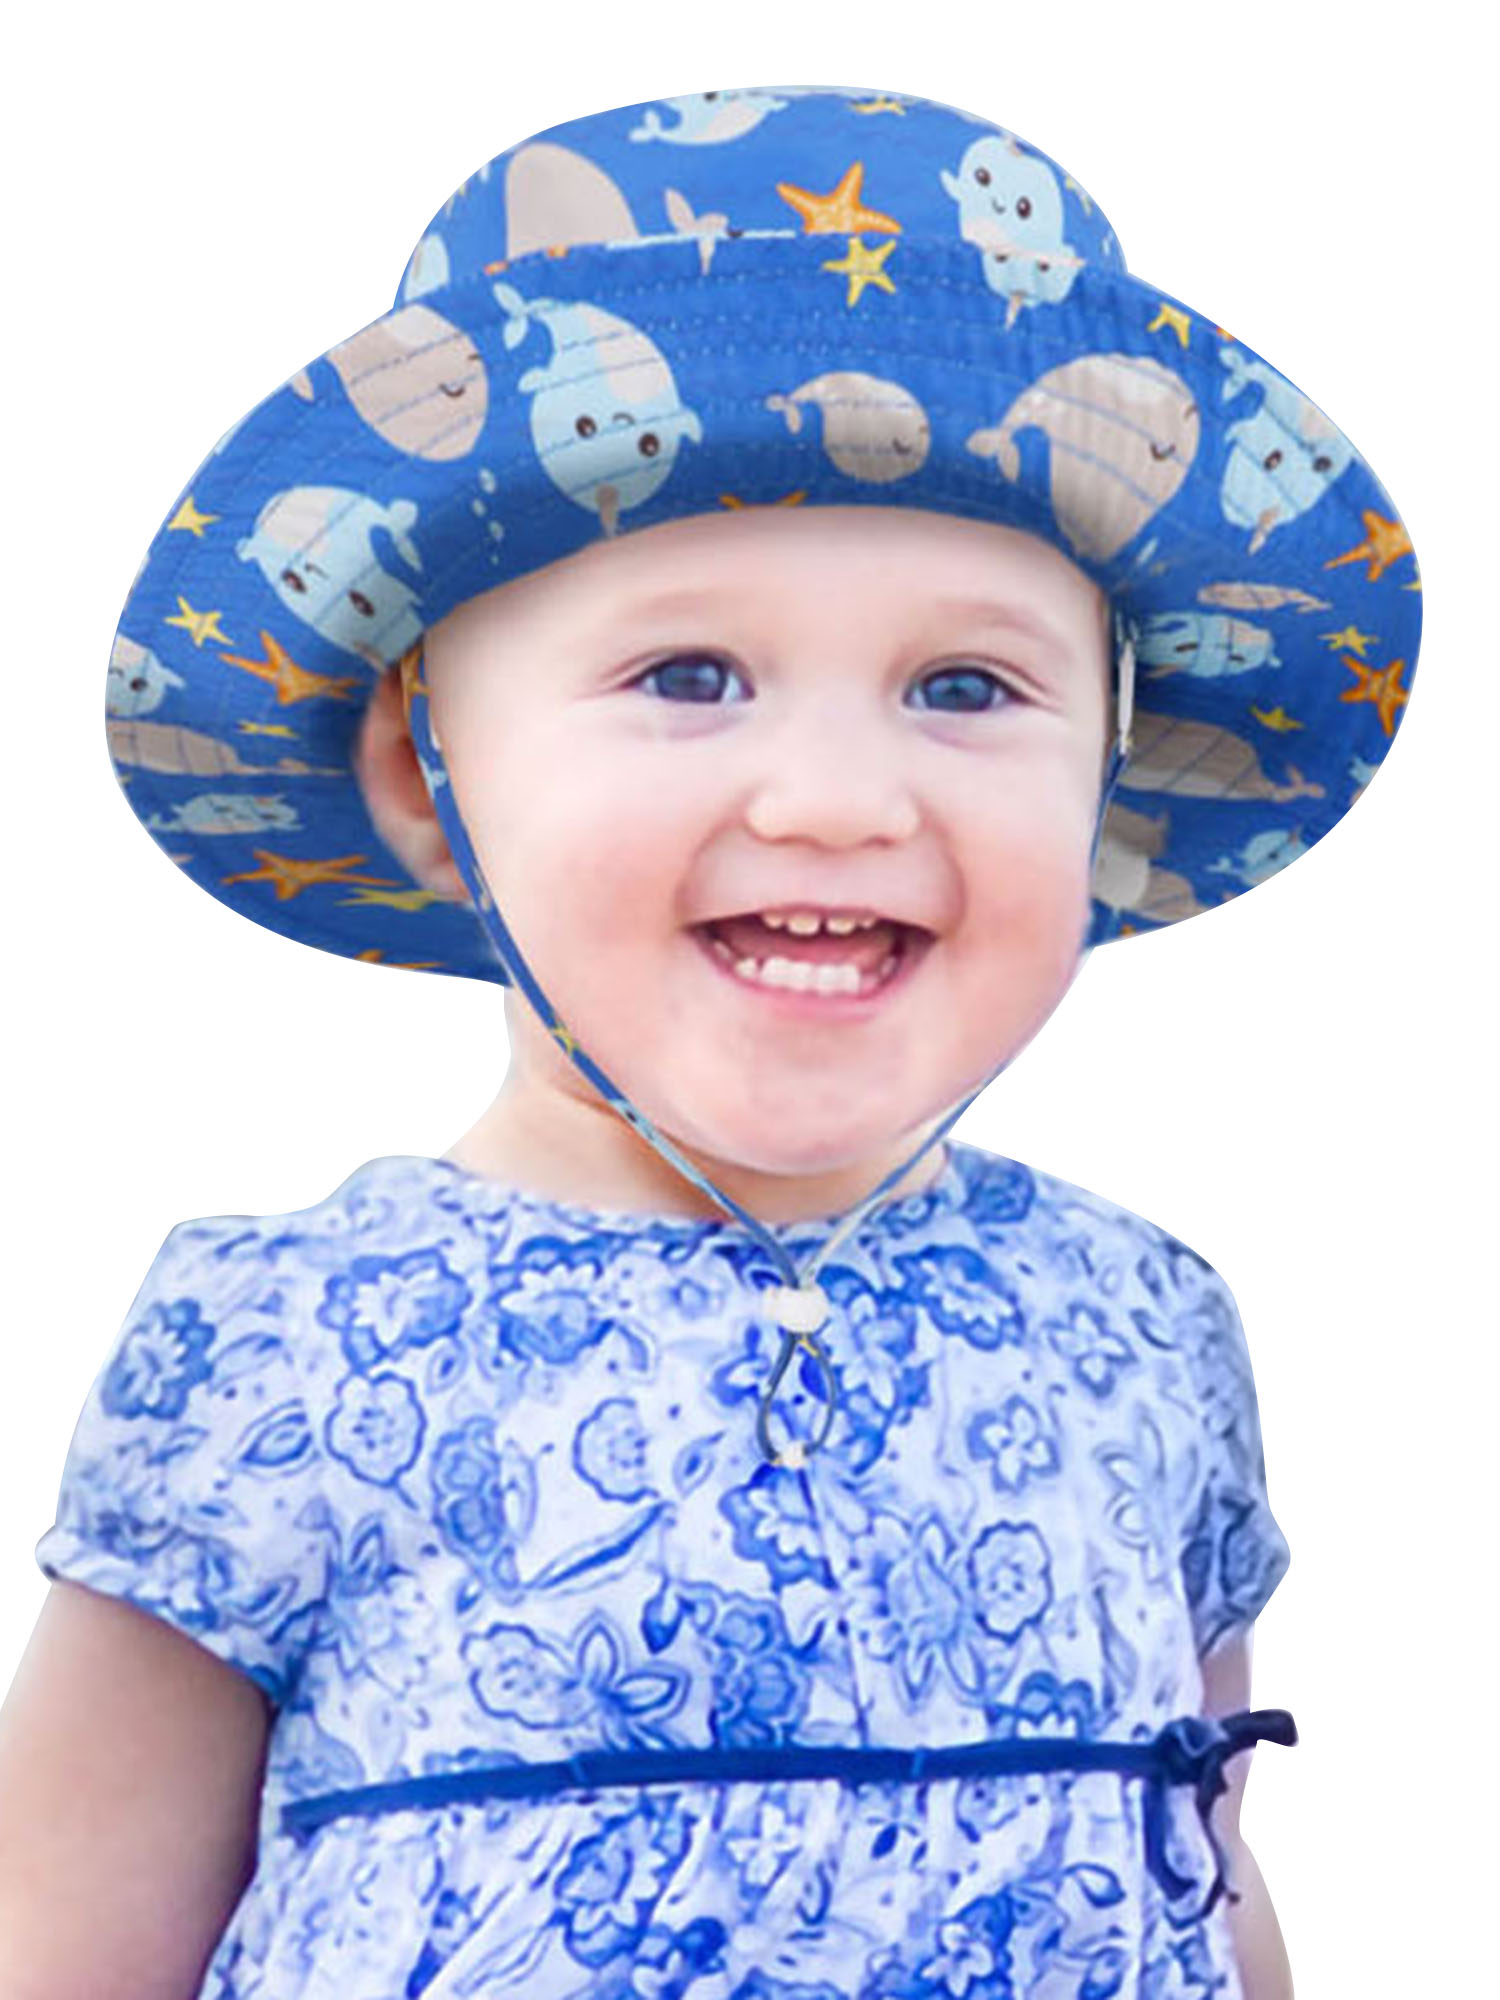 SimpliKids Hats for Kids Boys Hat Toddler Kids Baby Sun Hats Toddler Bucket Hats with uv Protection Sun Hats for Babies Sun Hat Kids Bucket Hat for Kids, Under The Sea , 2-4T - image 1 of 6